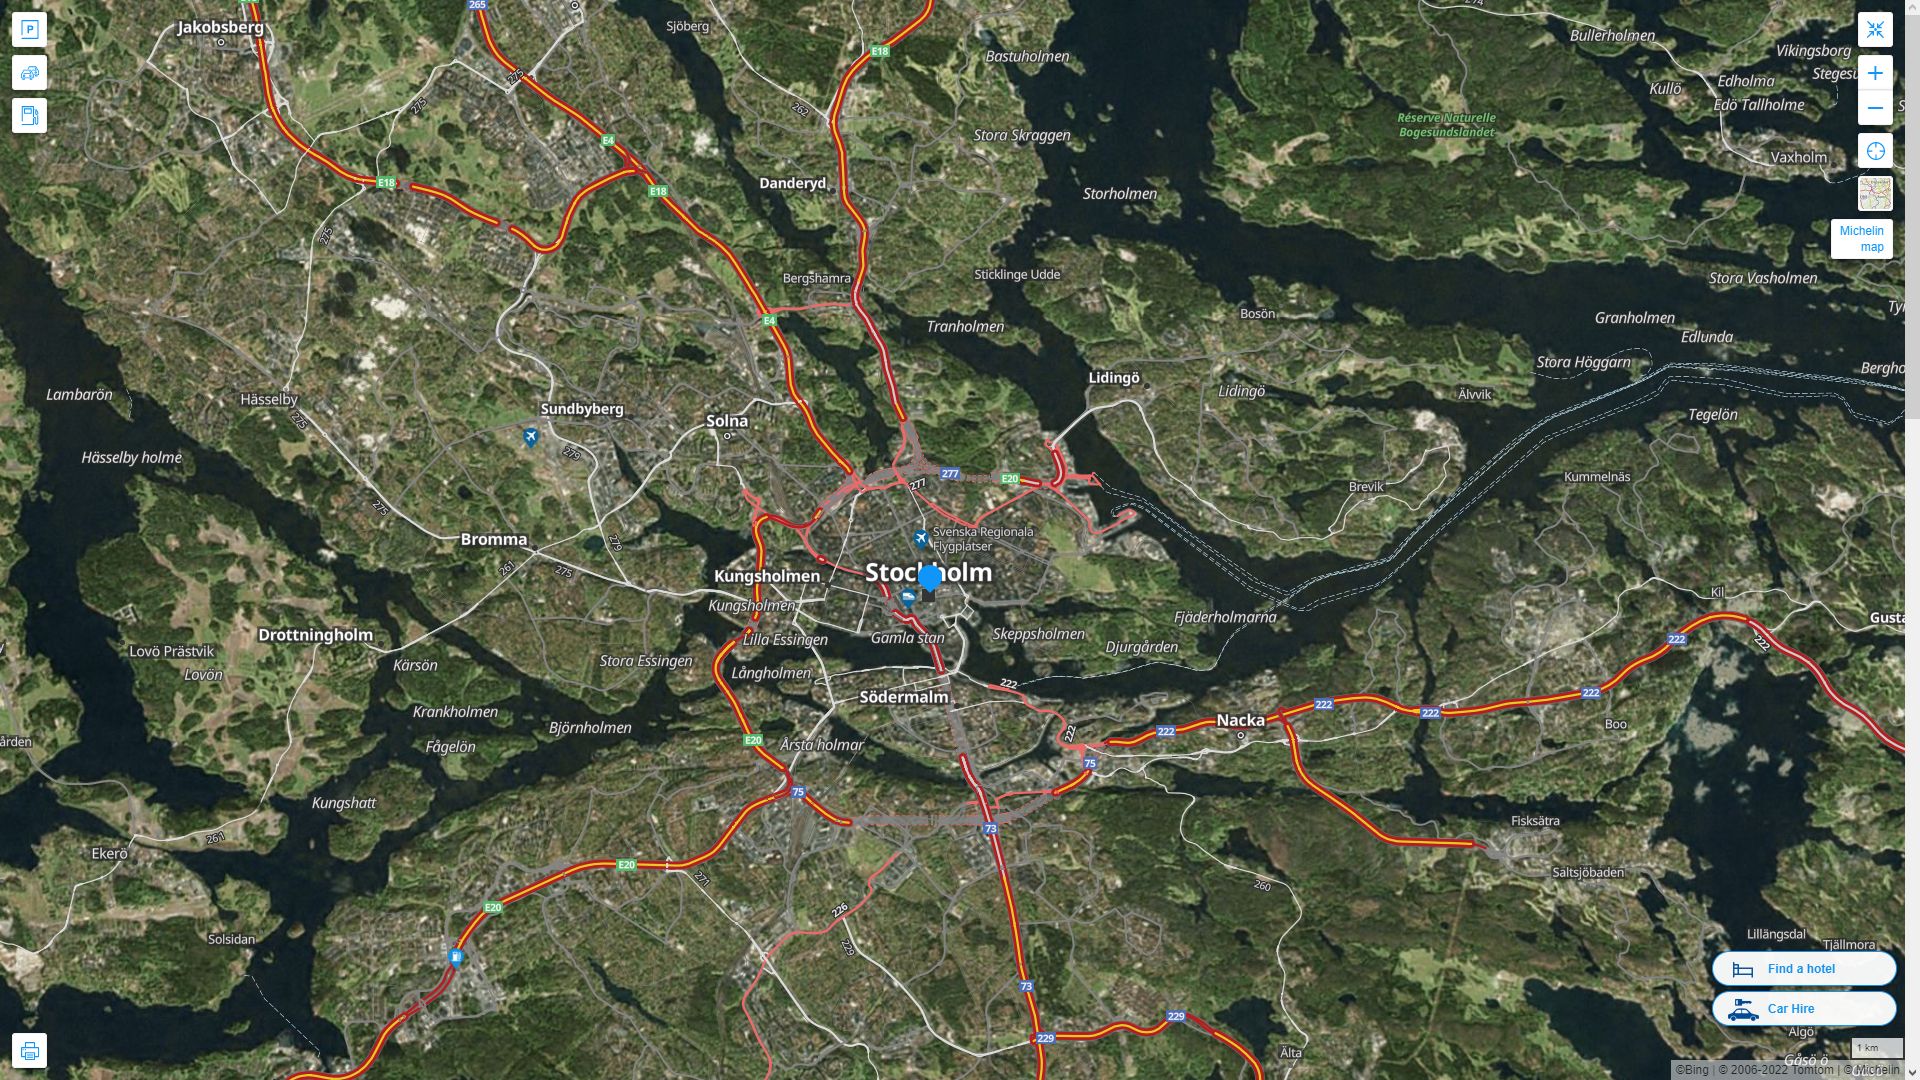 Stockholm Highway and Road Map with Satellite View